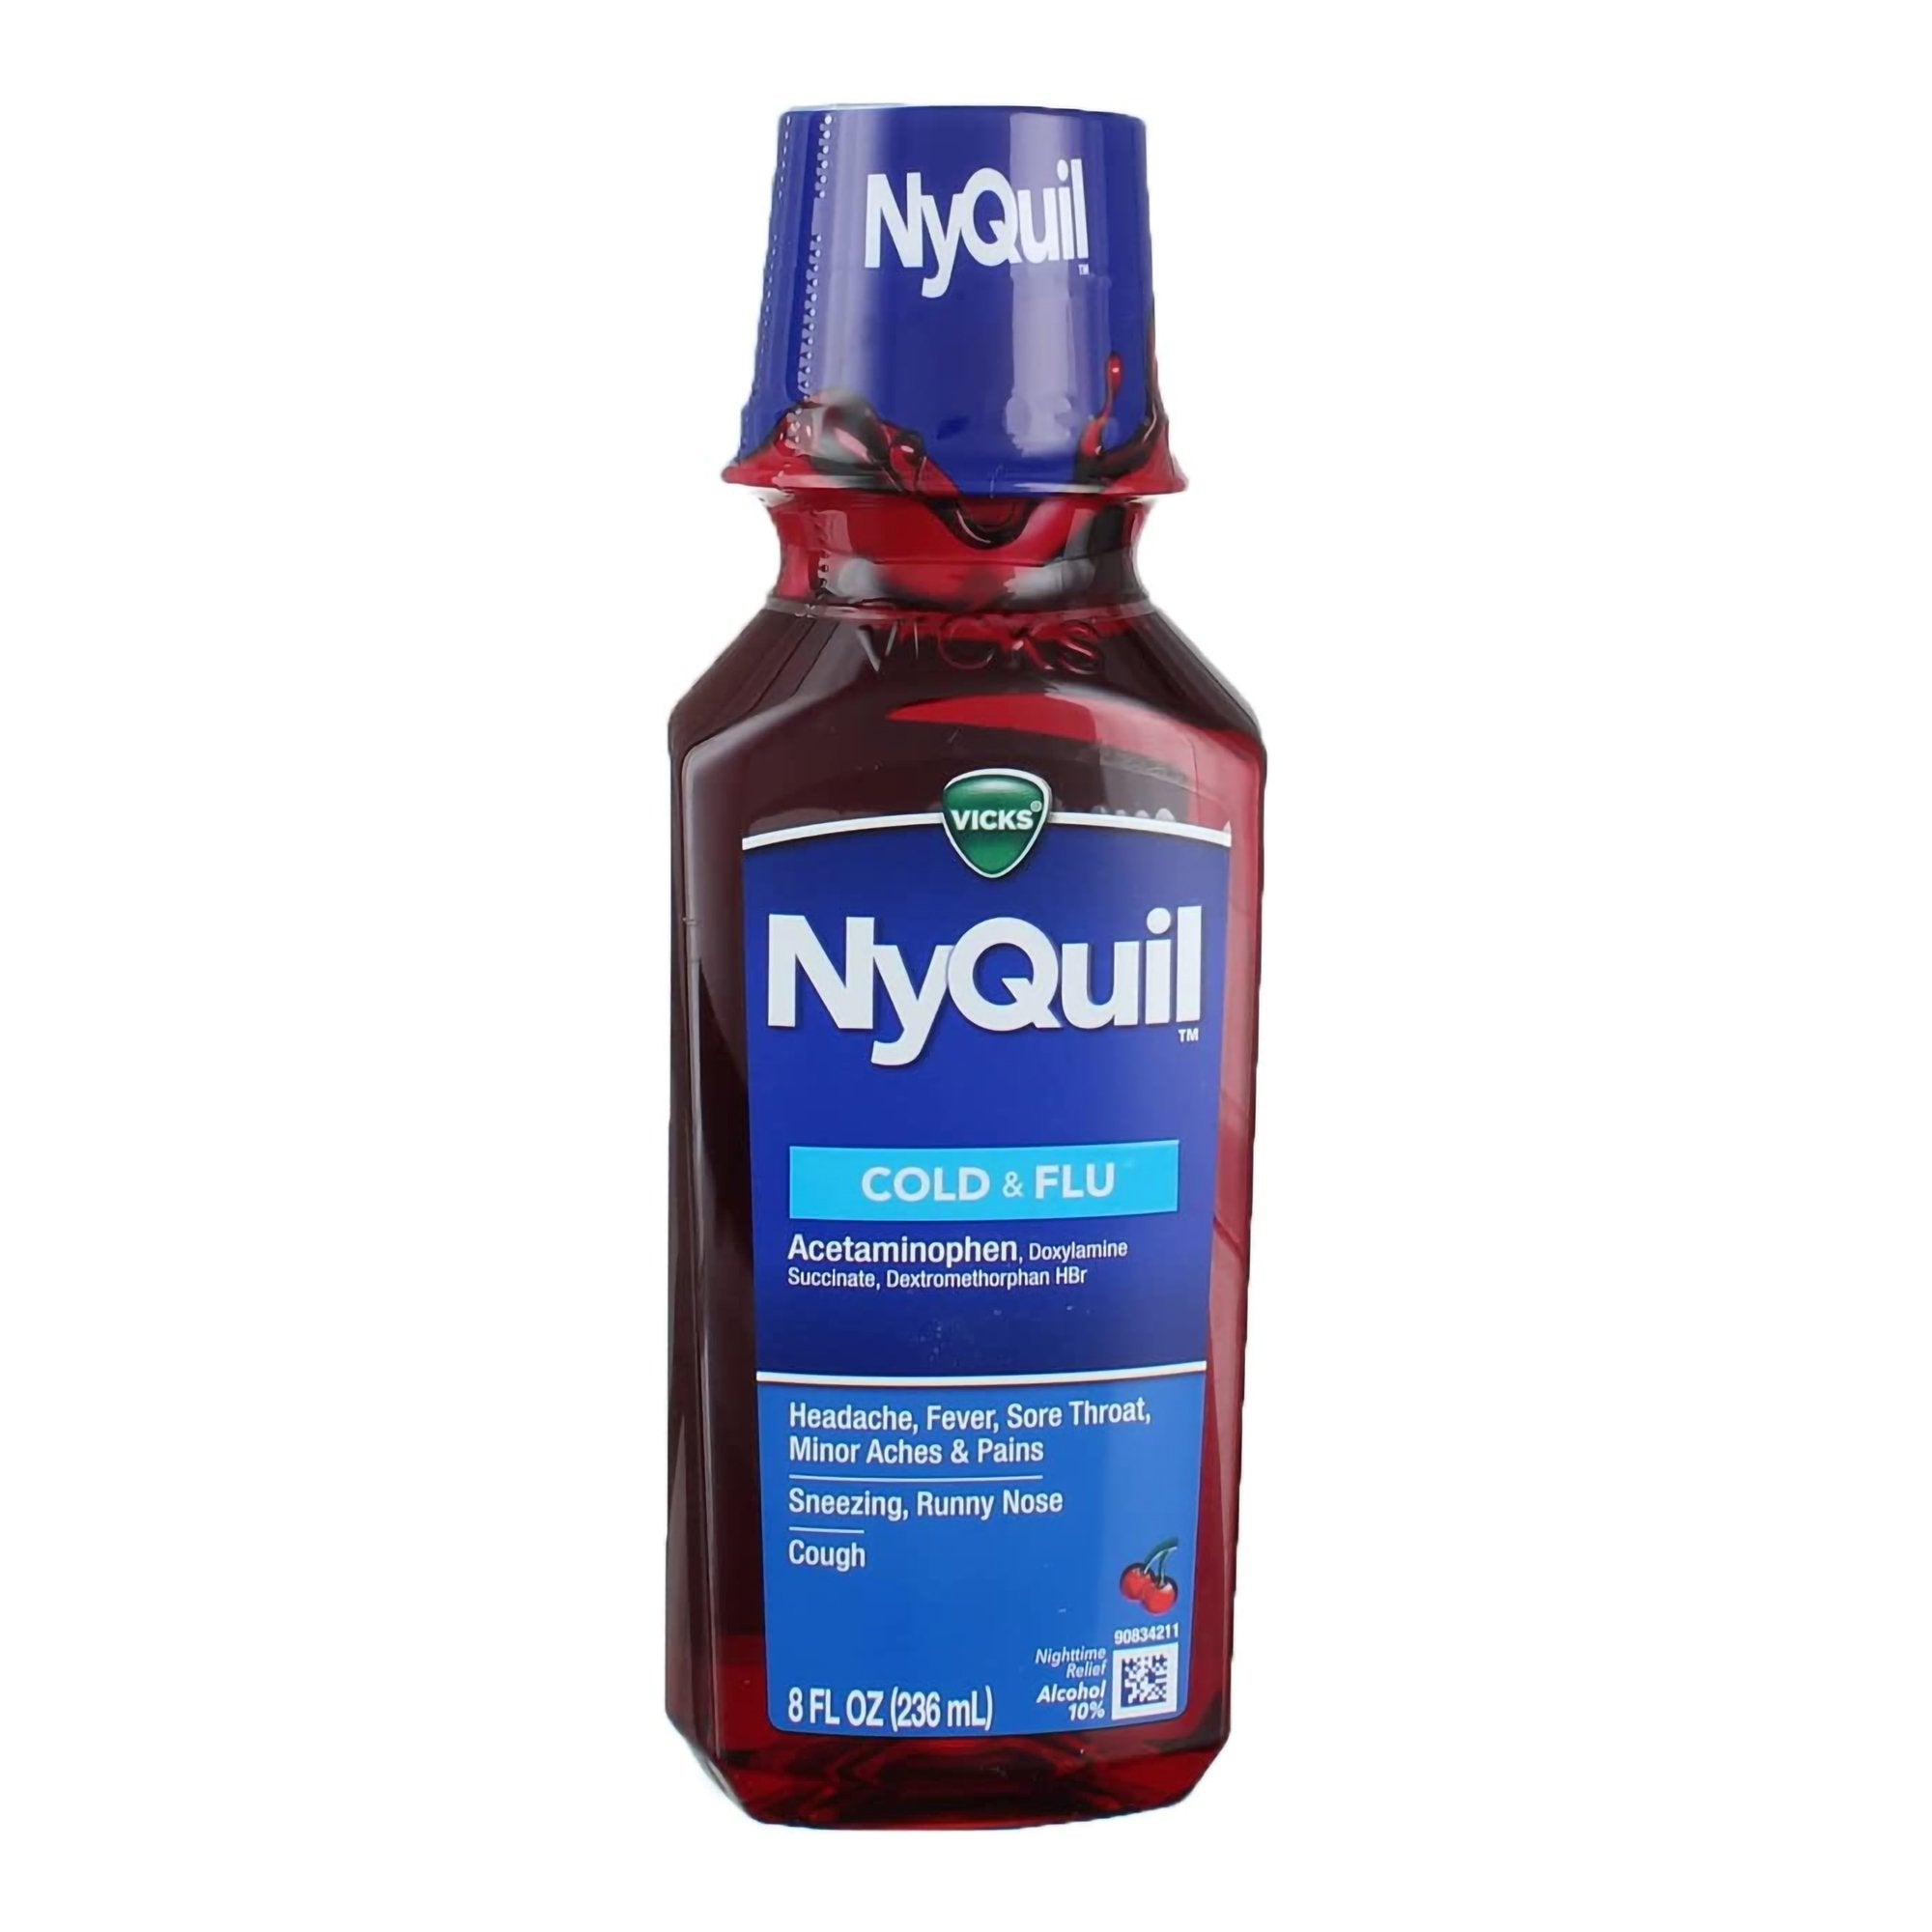 Cold and Cough Relief NyQuil® Cold & Flu 650 mg - 30 mg - 12.5 mg / 30 mL Strength Liquid 8 oz.